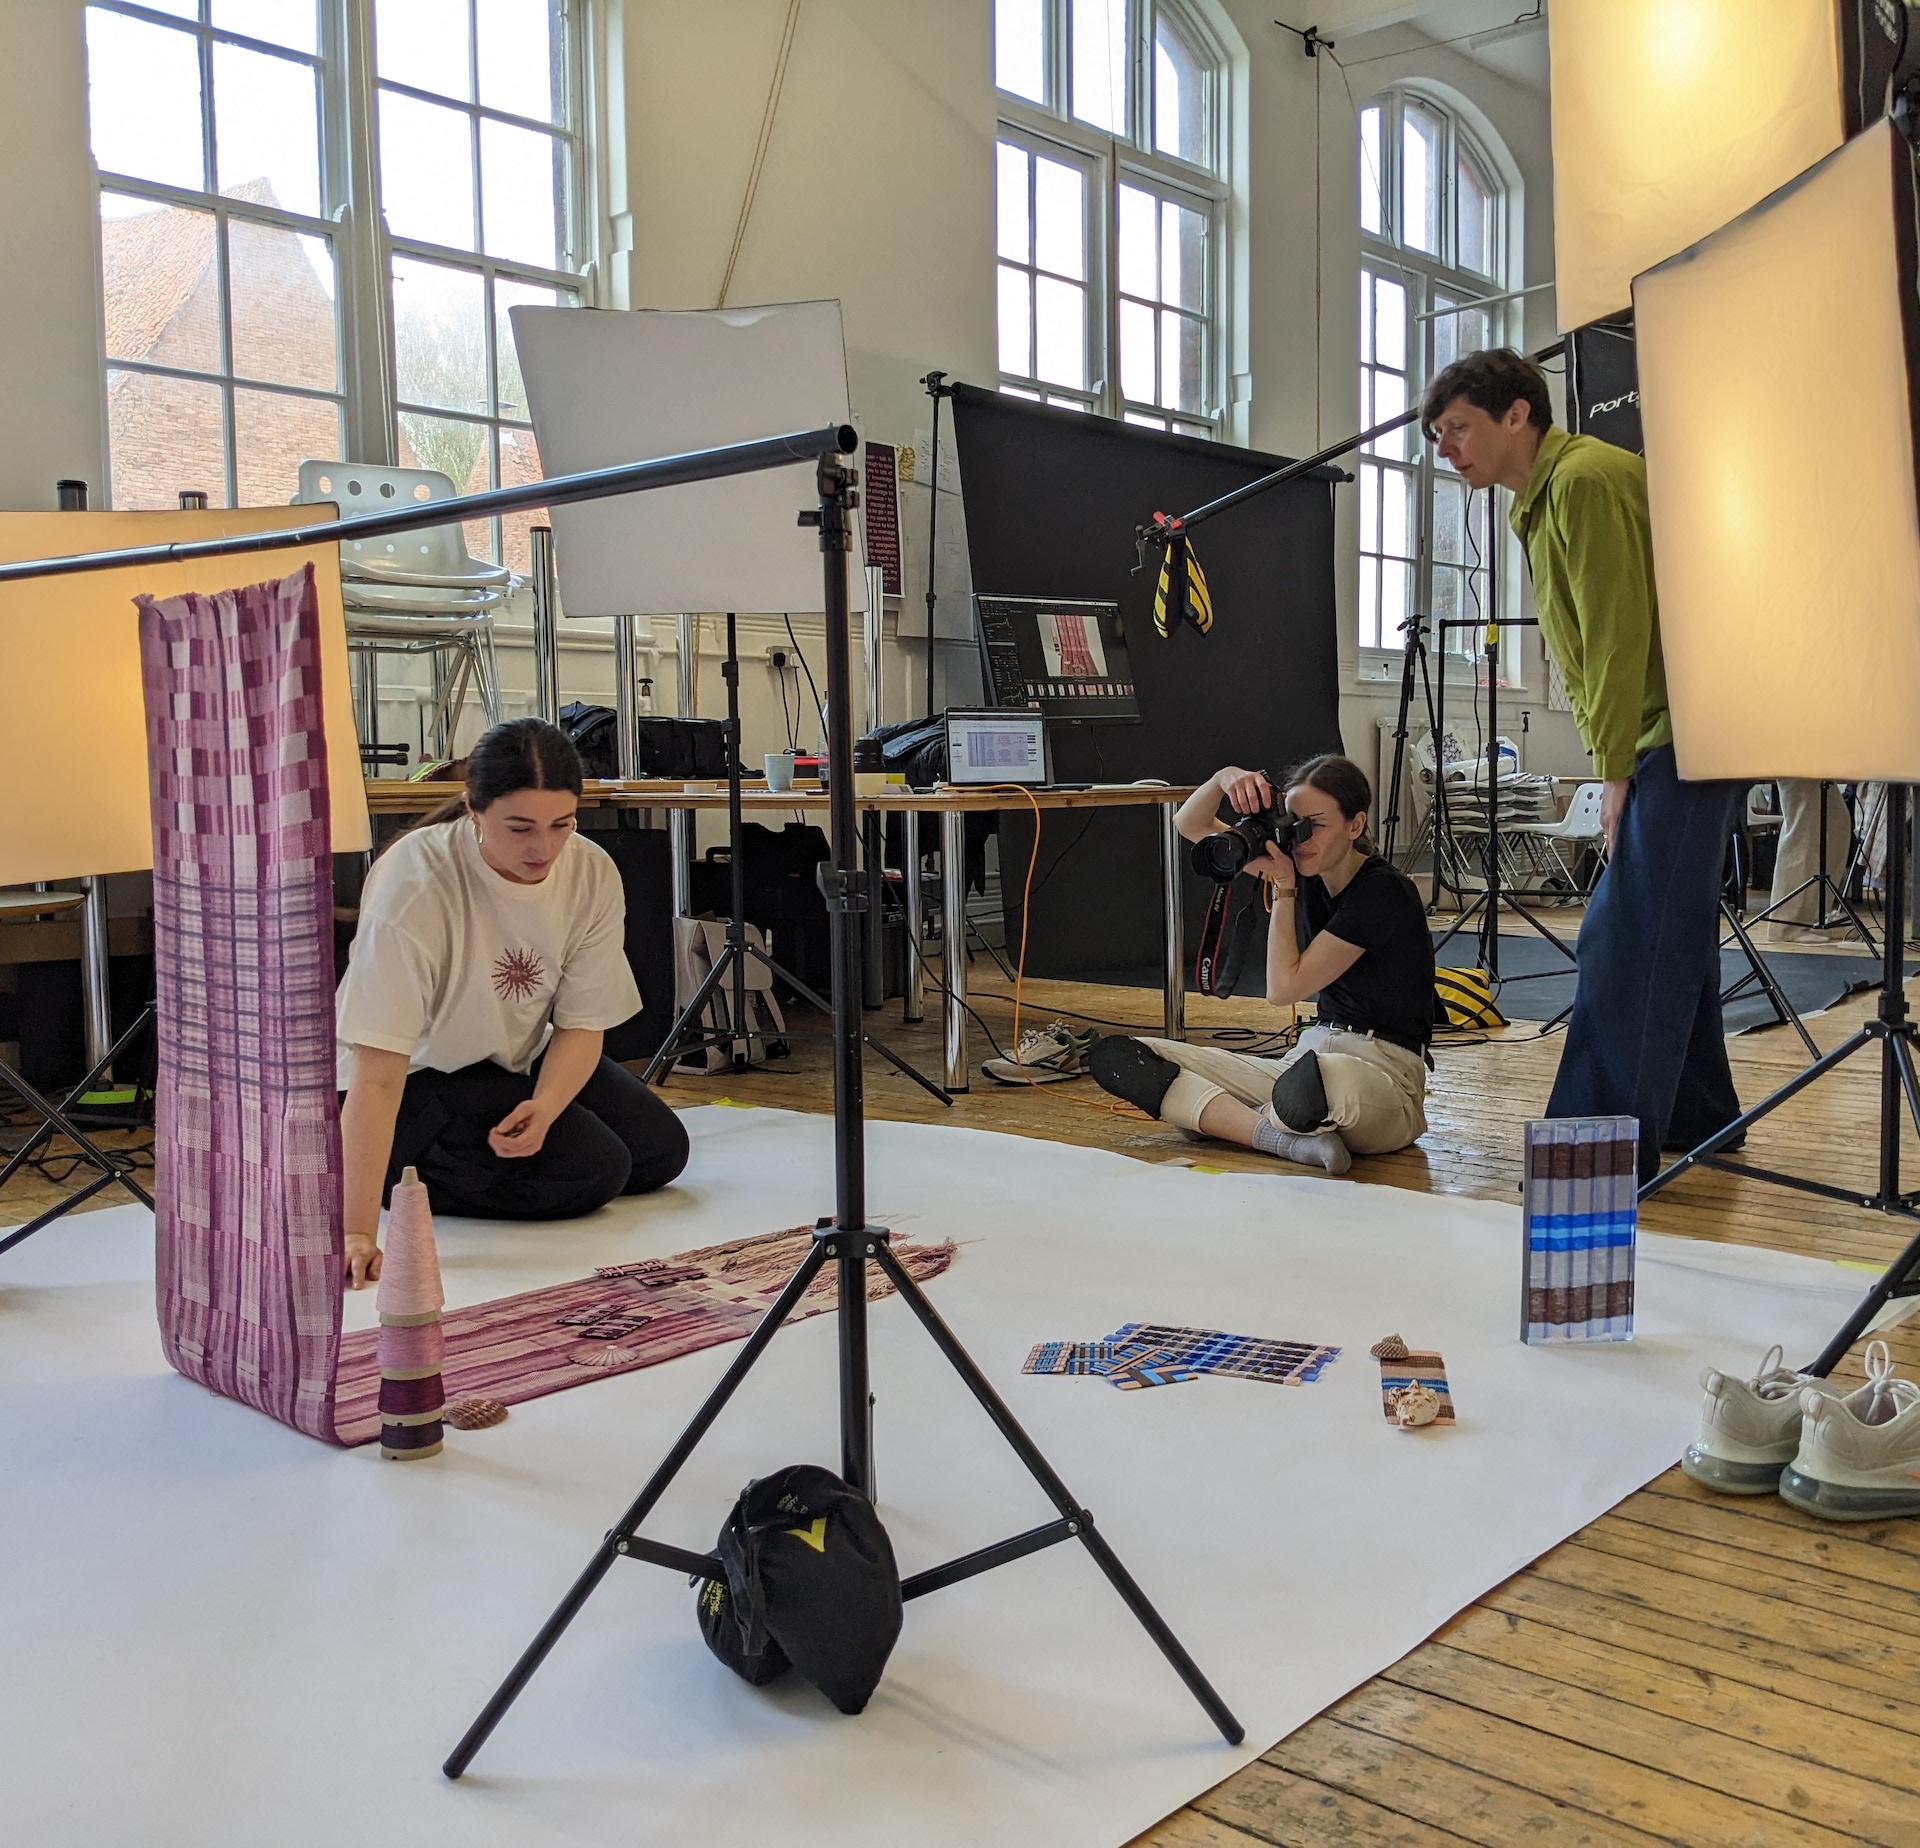 A student arranging their purple draped fabric on a stand in a photography shoot.